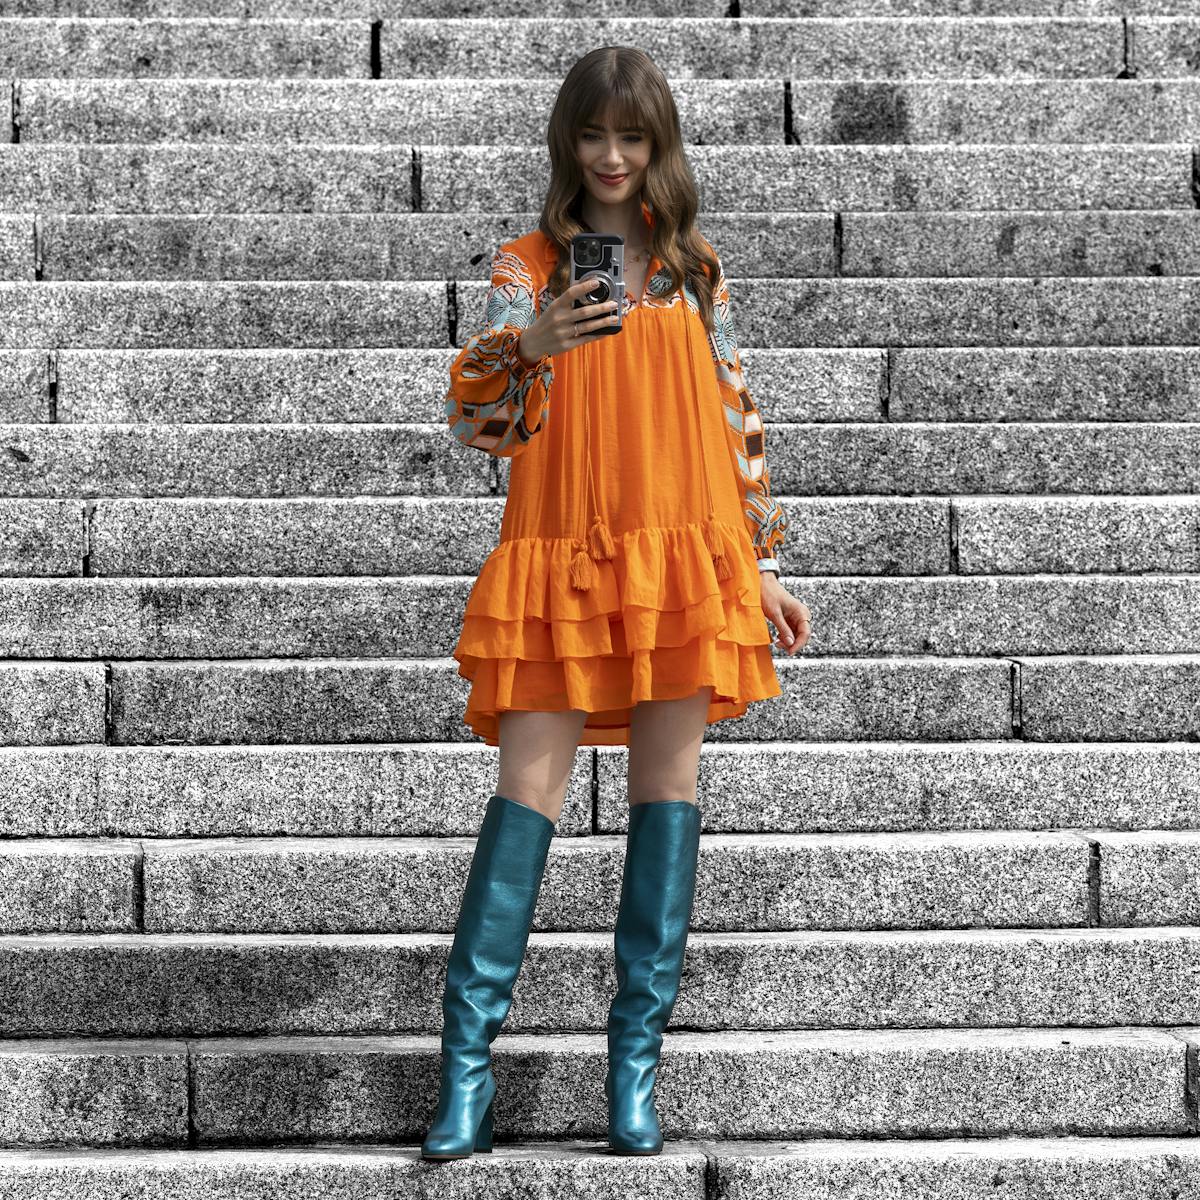 Emily Cooper (Lily Collins) wears an orange dress and blue heeled boots as she takes a selfie on some stone steps.